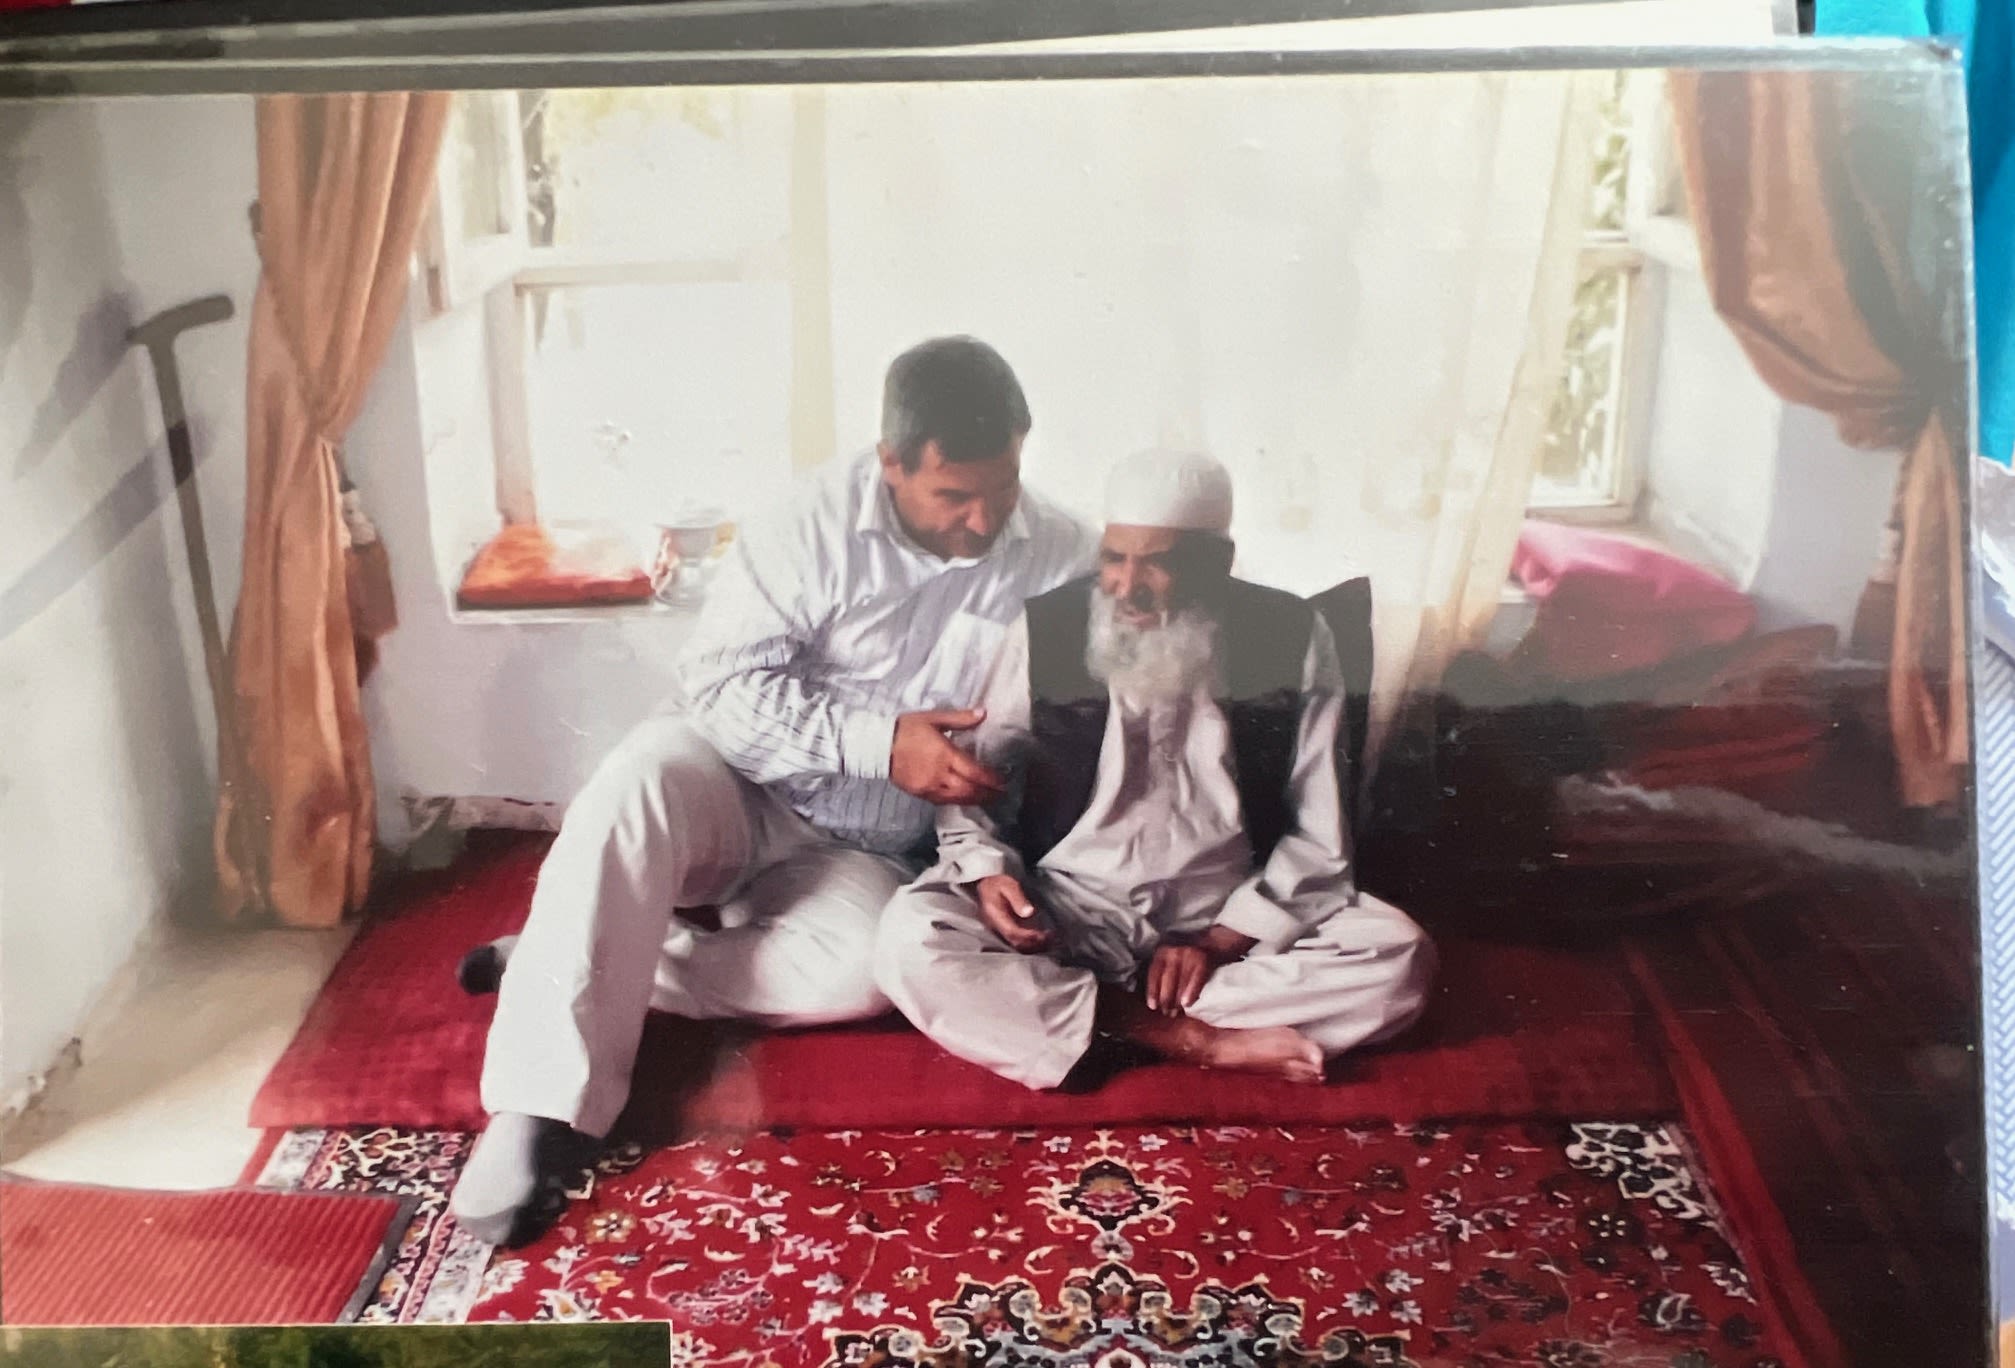 Photo credit: Shabnam Nasimi - Dr Nasimi visiting his grandfather in Ghorband for the first time in 20 years.